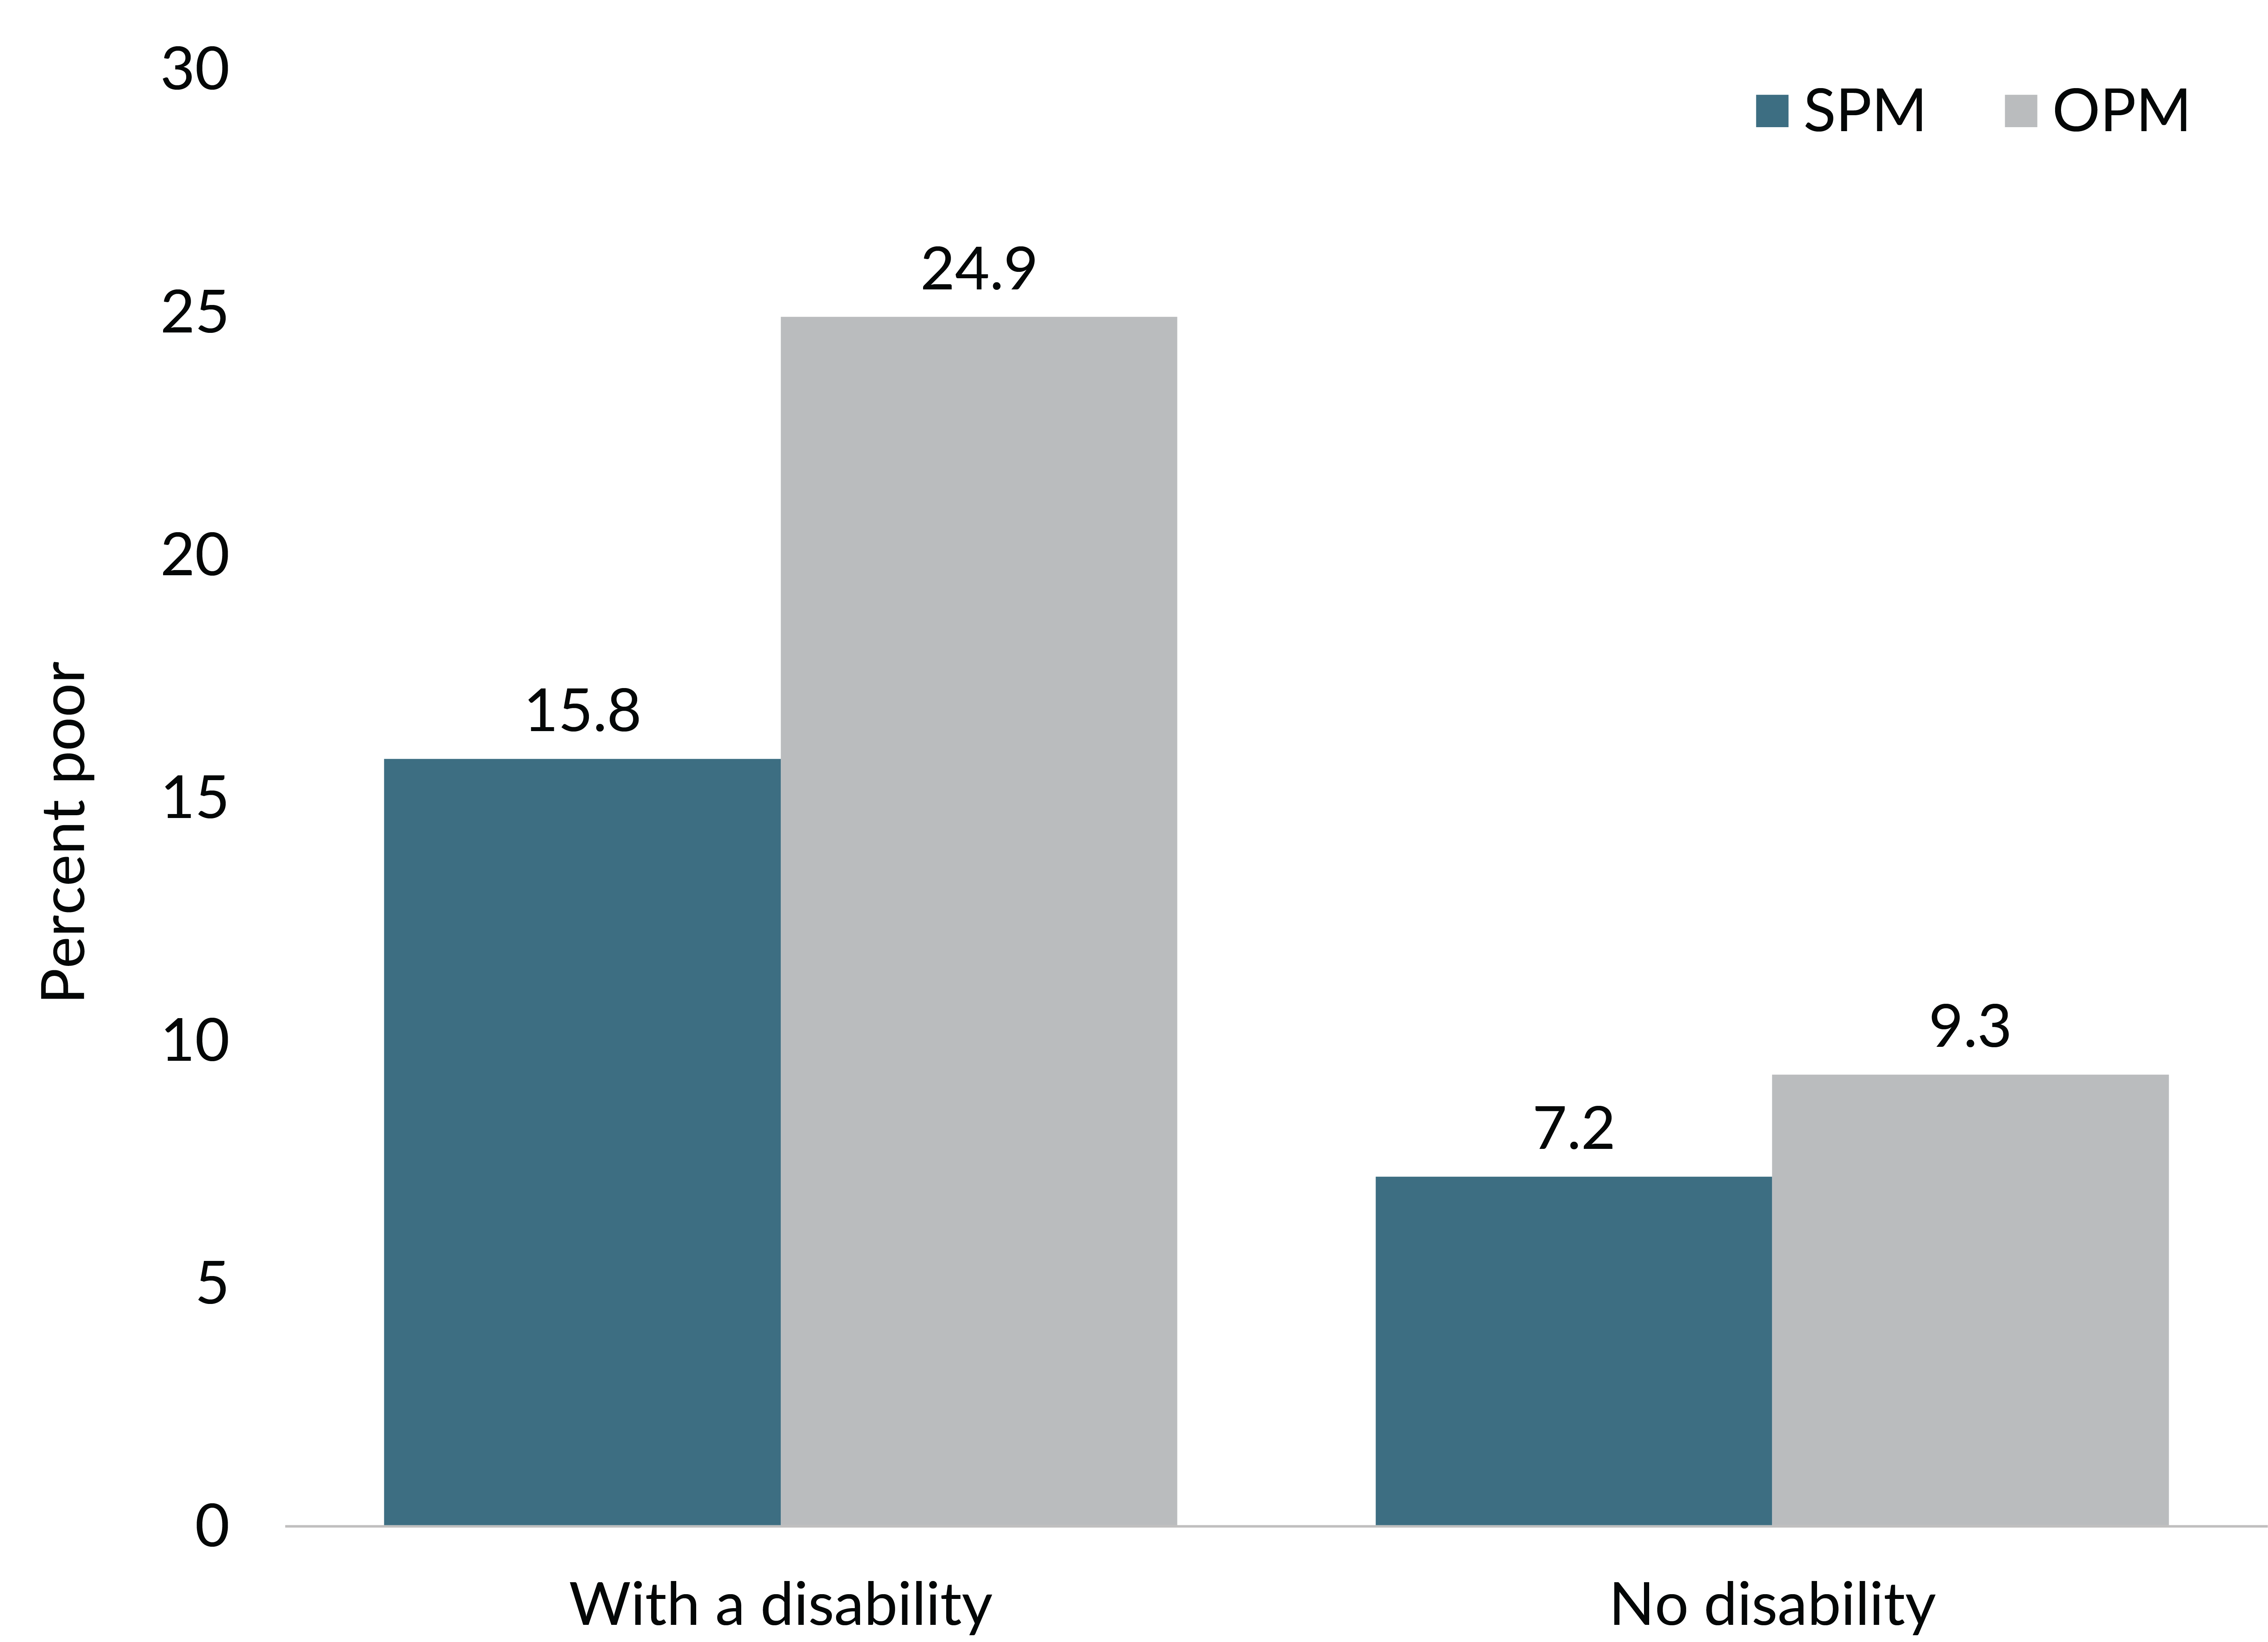 Figure is a column graph showing poverty rates for those with a disability and those with no disability under the SPM and OPM. Those with a disability have poverty rates between about 2 and 2.5 times those with no disability.